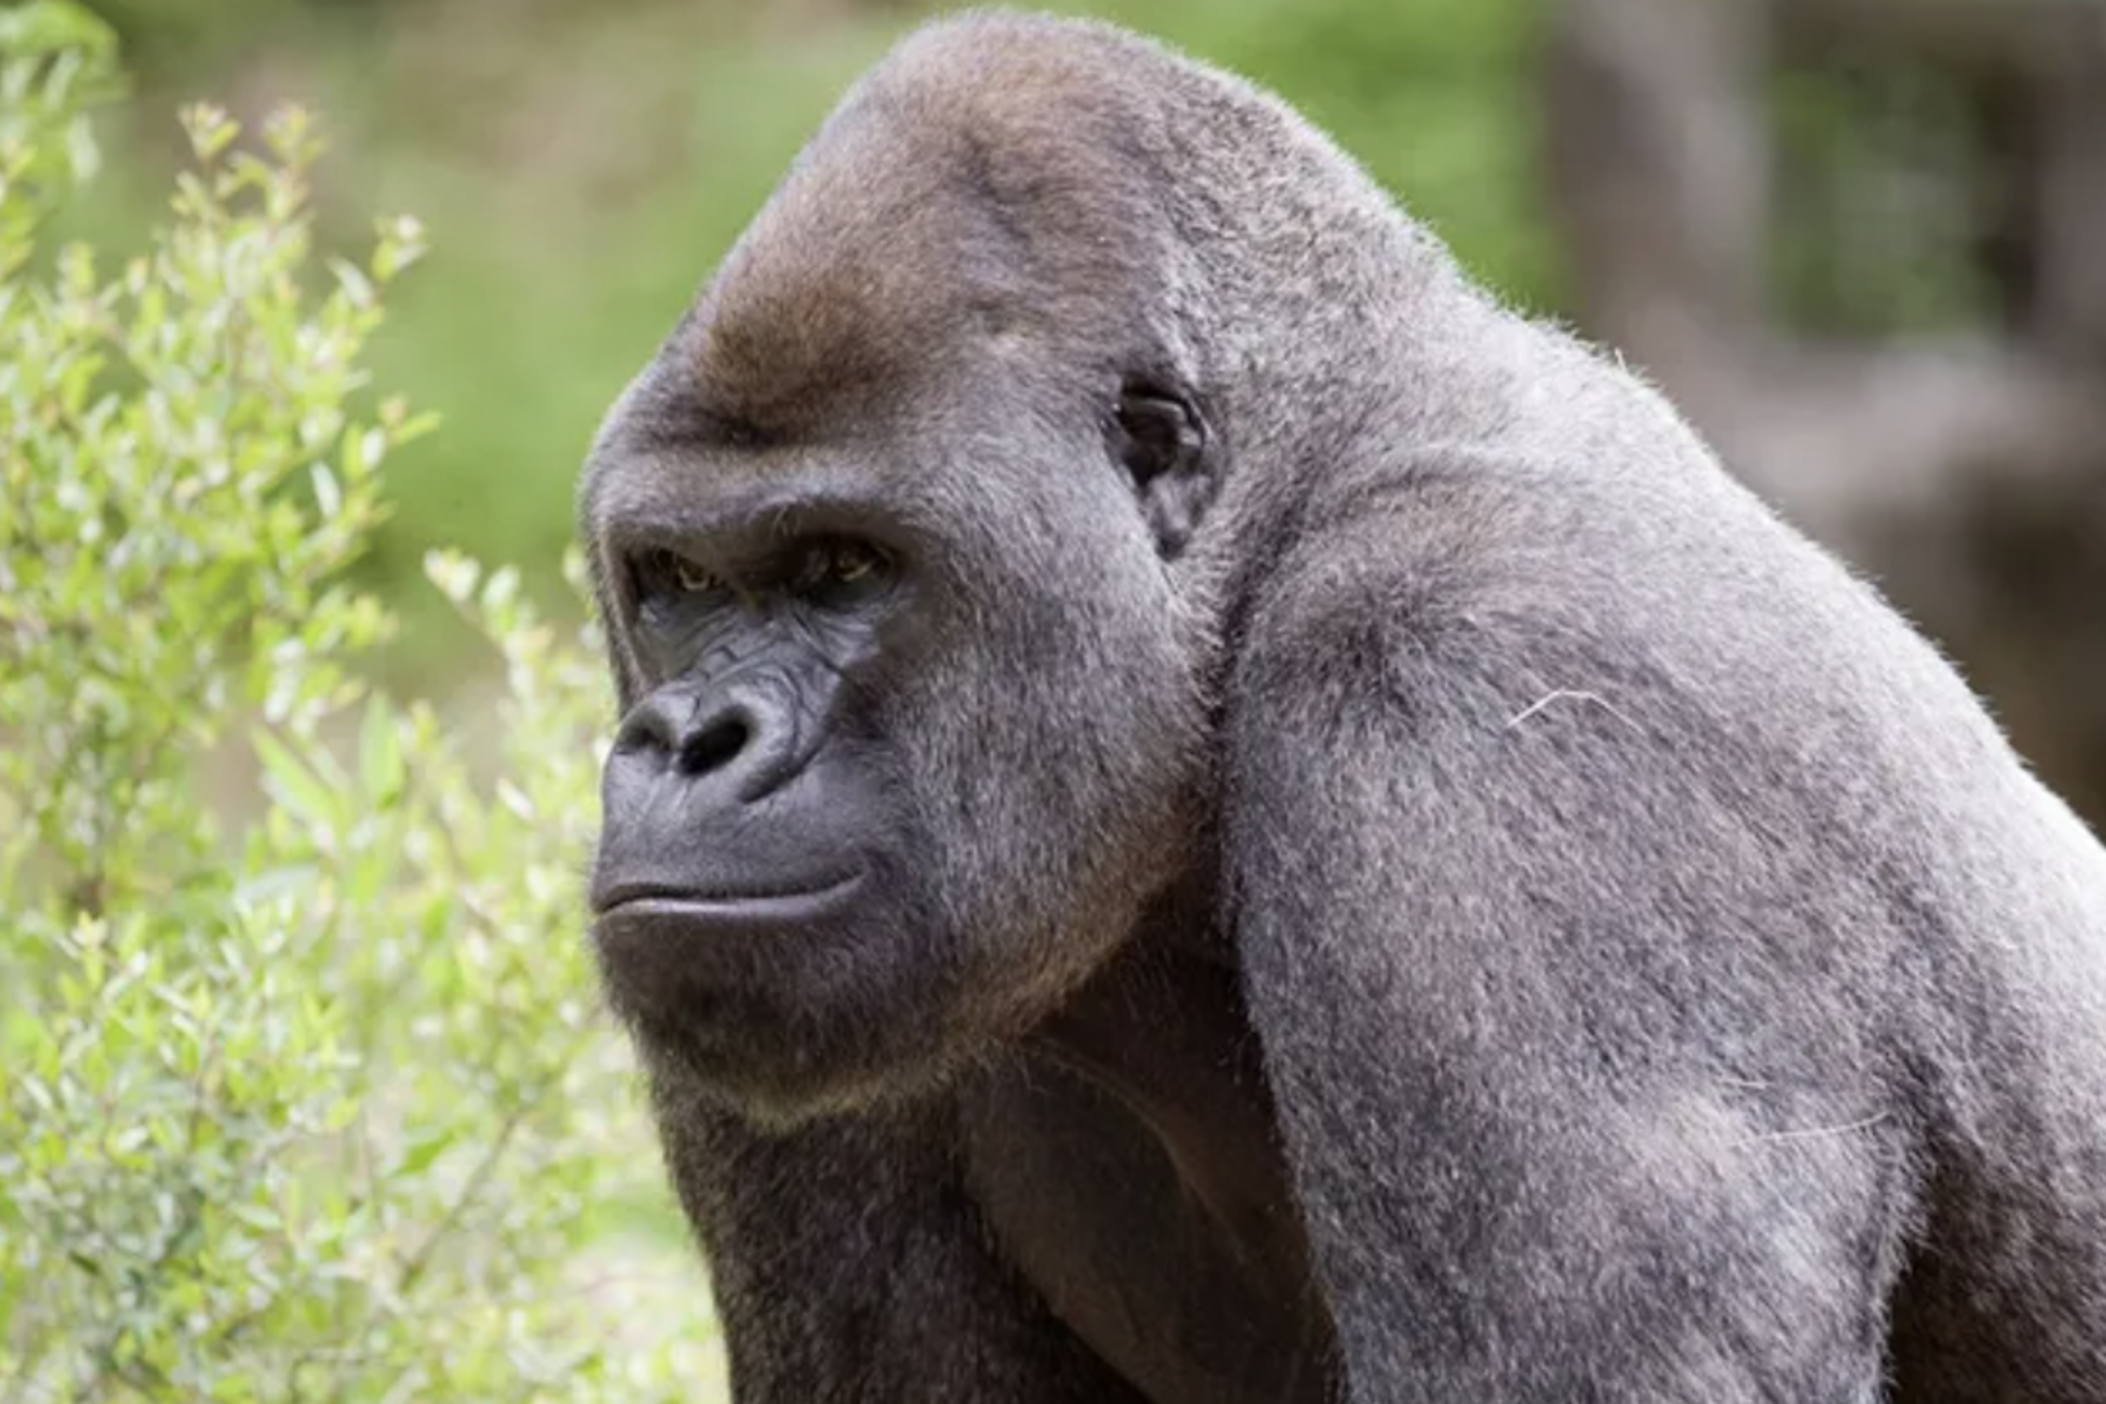 Zoo Atlanta says several of its gorillas are being treated with monoclonal antibodies after tests indicated they could be sick with COVID-19.